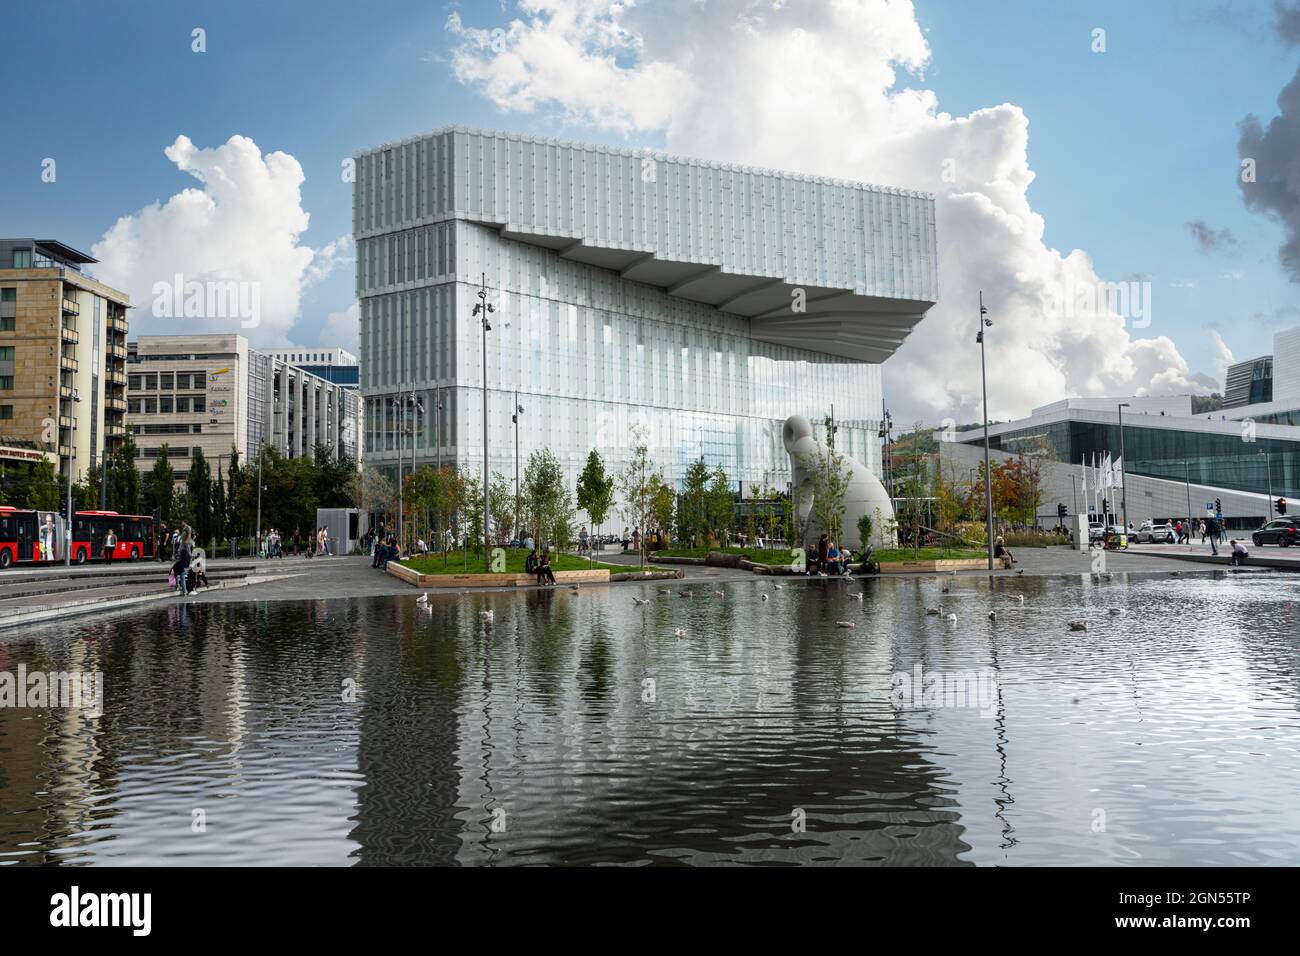 Oslo, Norway. September 2021. exterior view of the public library Deichman Bjørvika in the city center Stock Photo